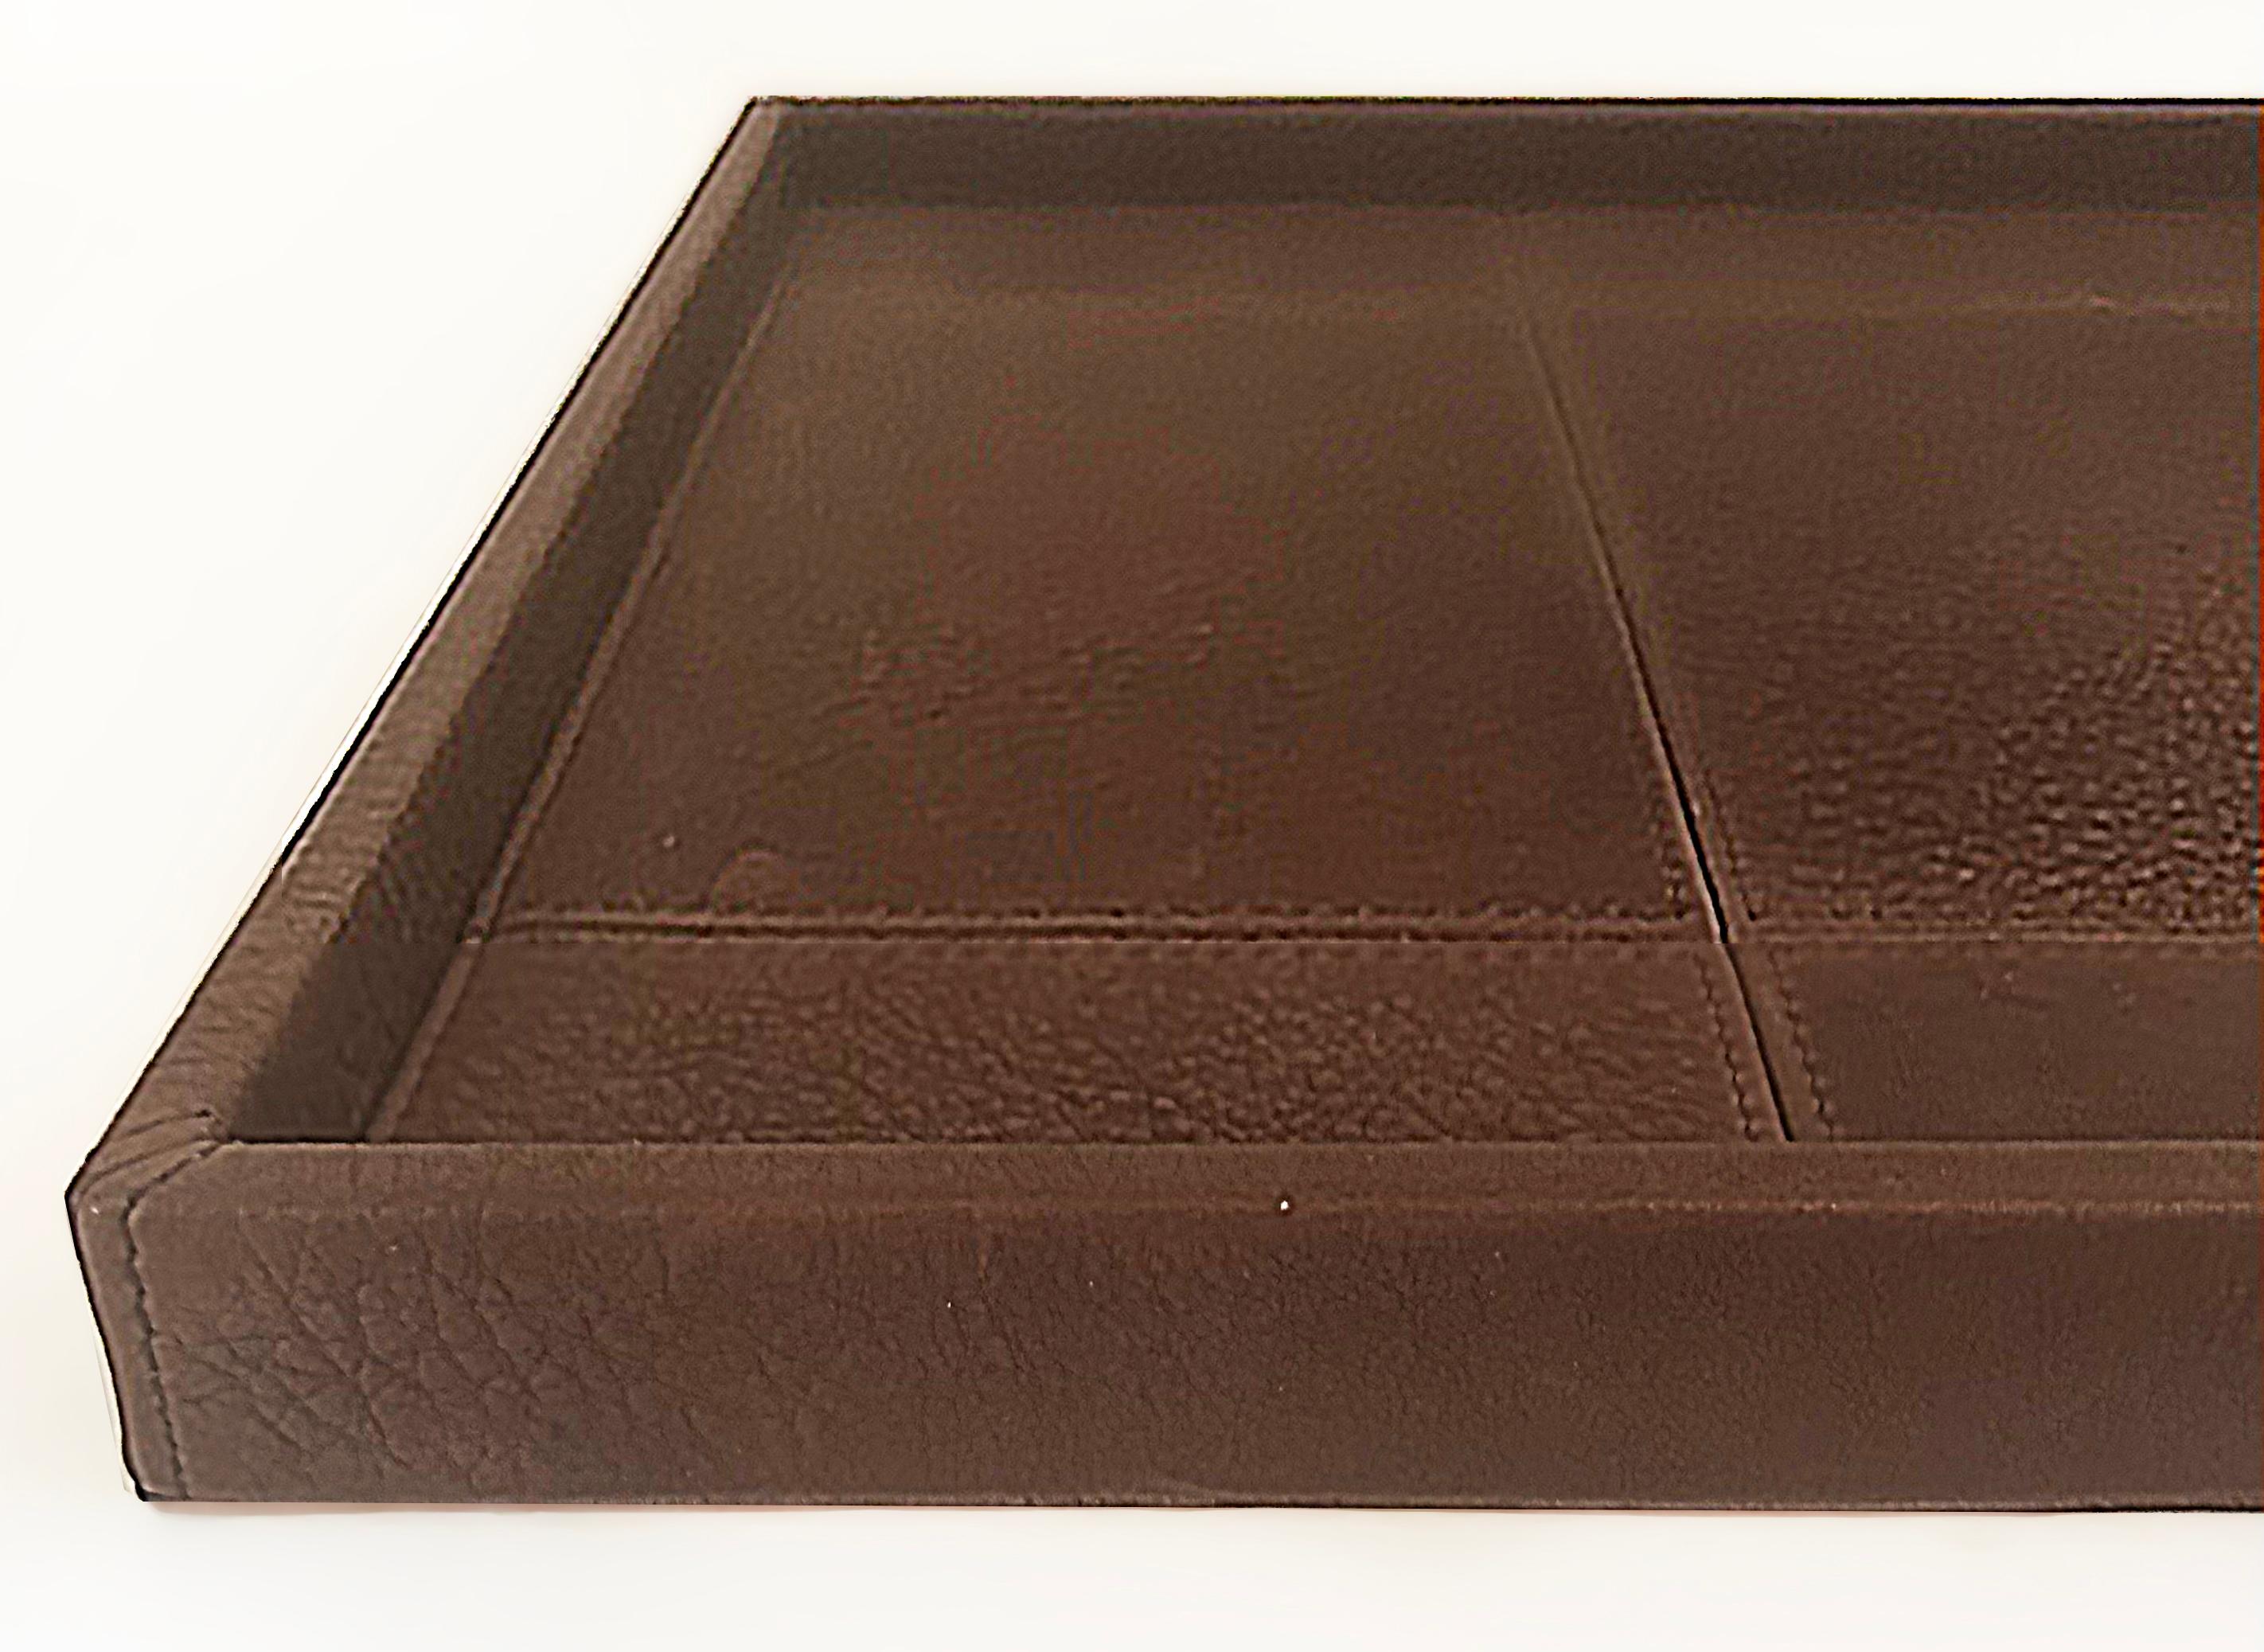 Gilles Caffier Leather Clad Vanity Tray Made in France 2006 In Good Condition For Sale In Miami, FL